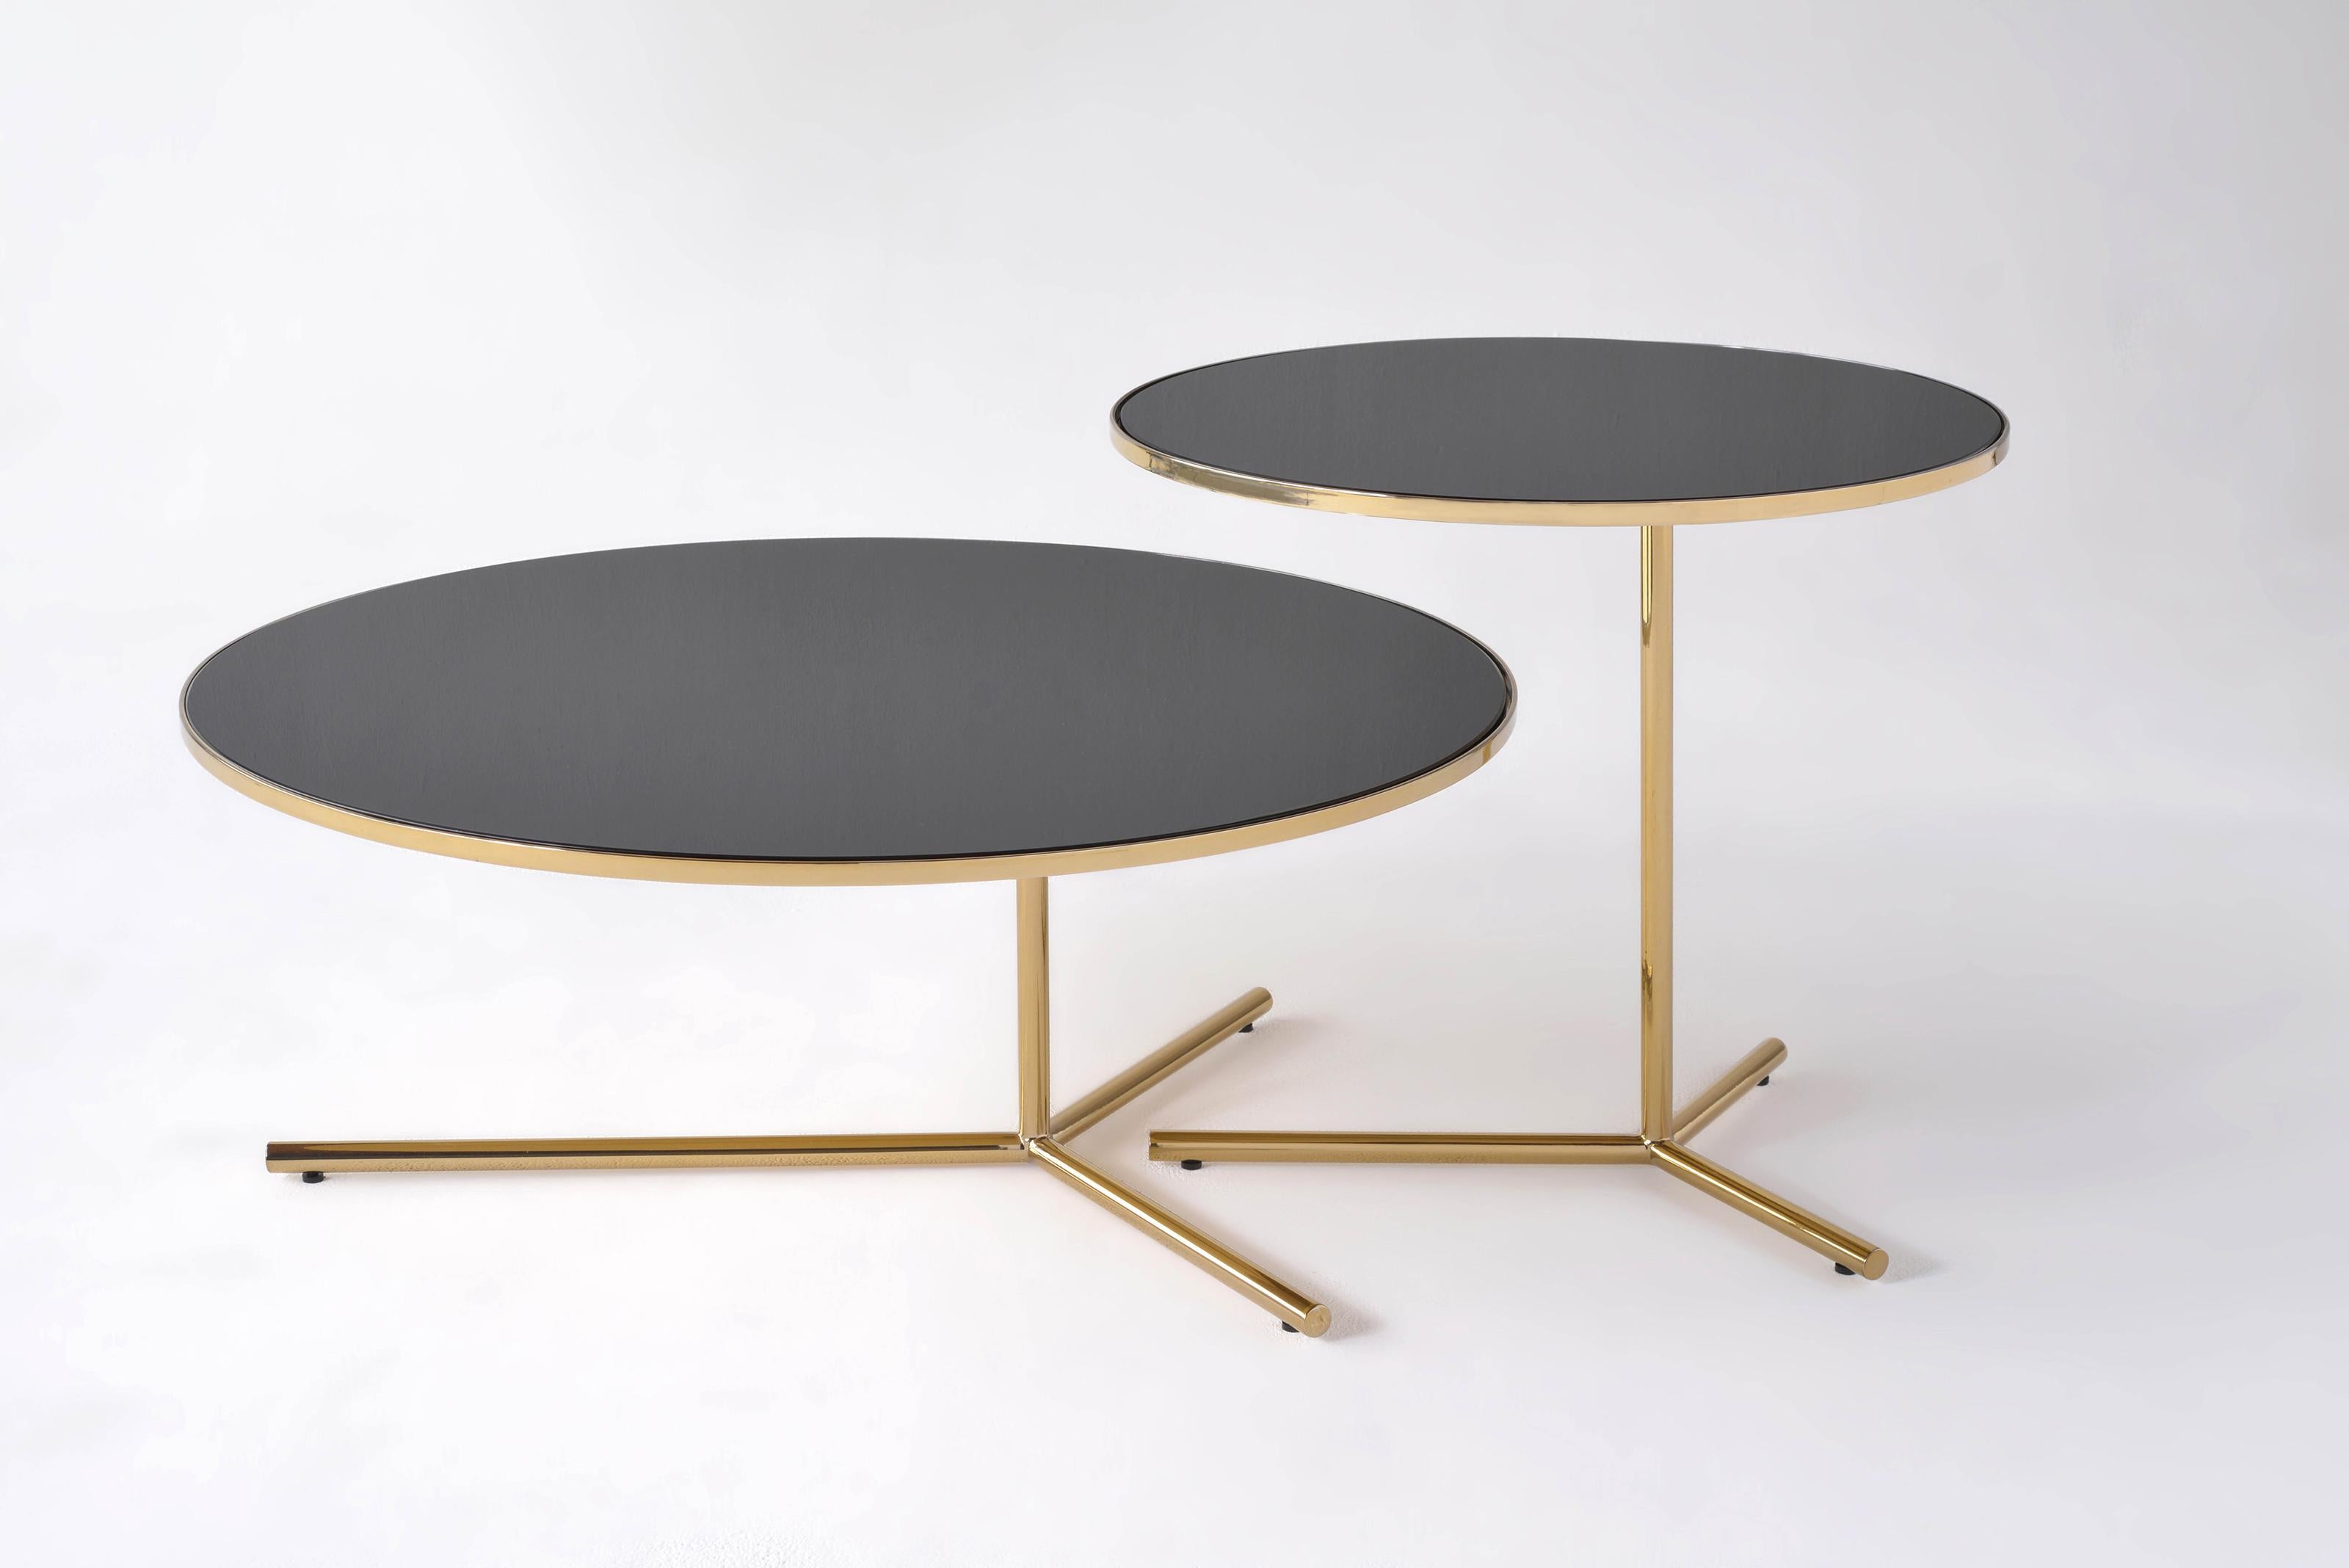 Set Of 2 Downtown Tables by Phase Design
Dimensions: Large: Ø 76,2 x H 30,5 cm. 
Medium: Ø 50,8 x H 45,7 cm. 
Materials: Spandrel glass, steel and polished brass.

Solid steel base available in flat or gloss black and white powder coat, polished